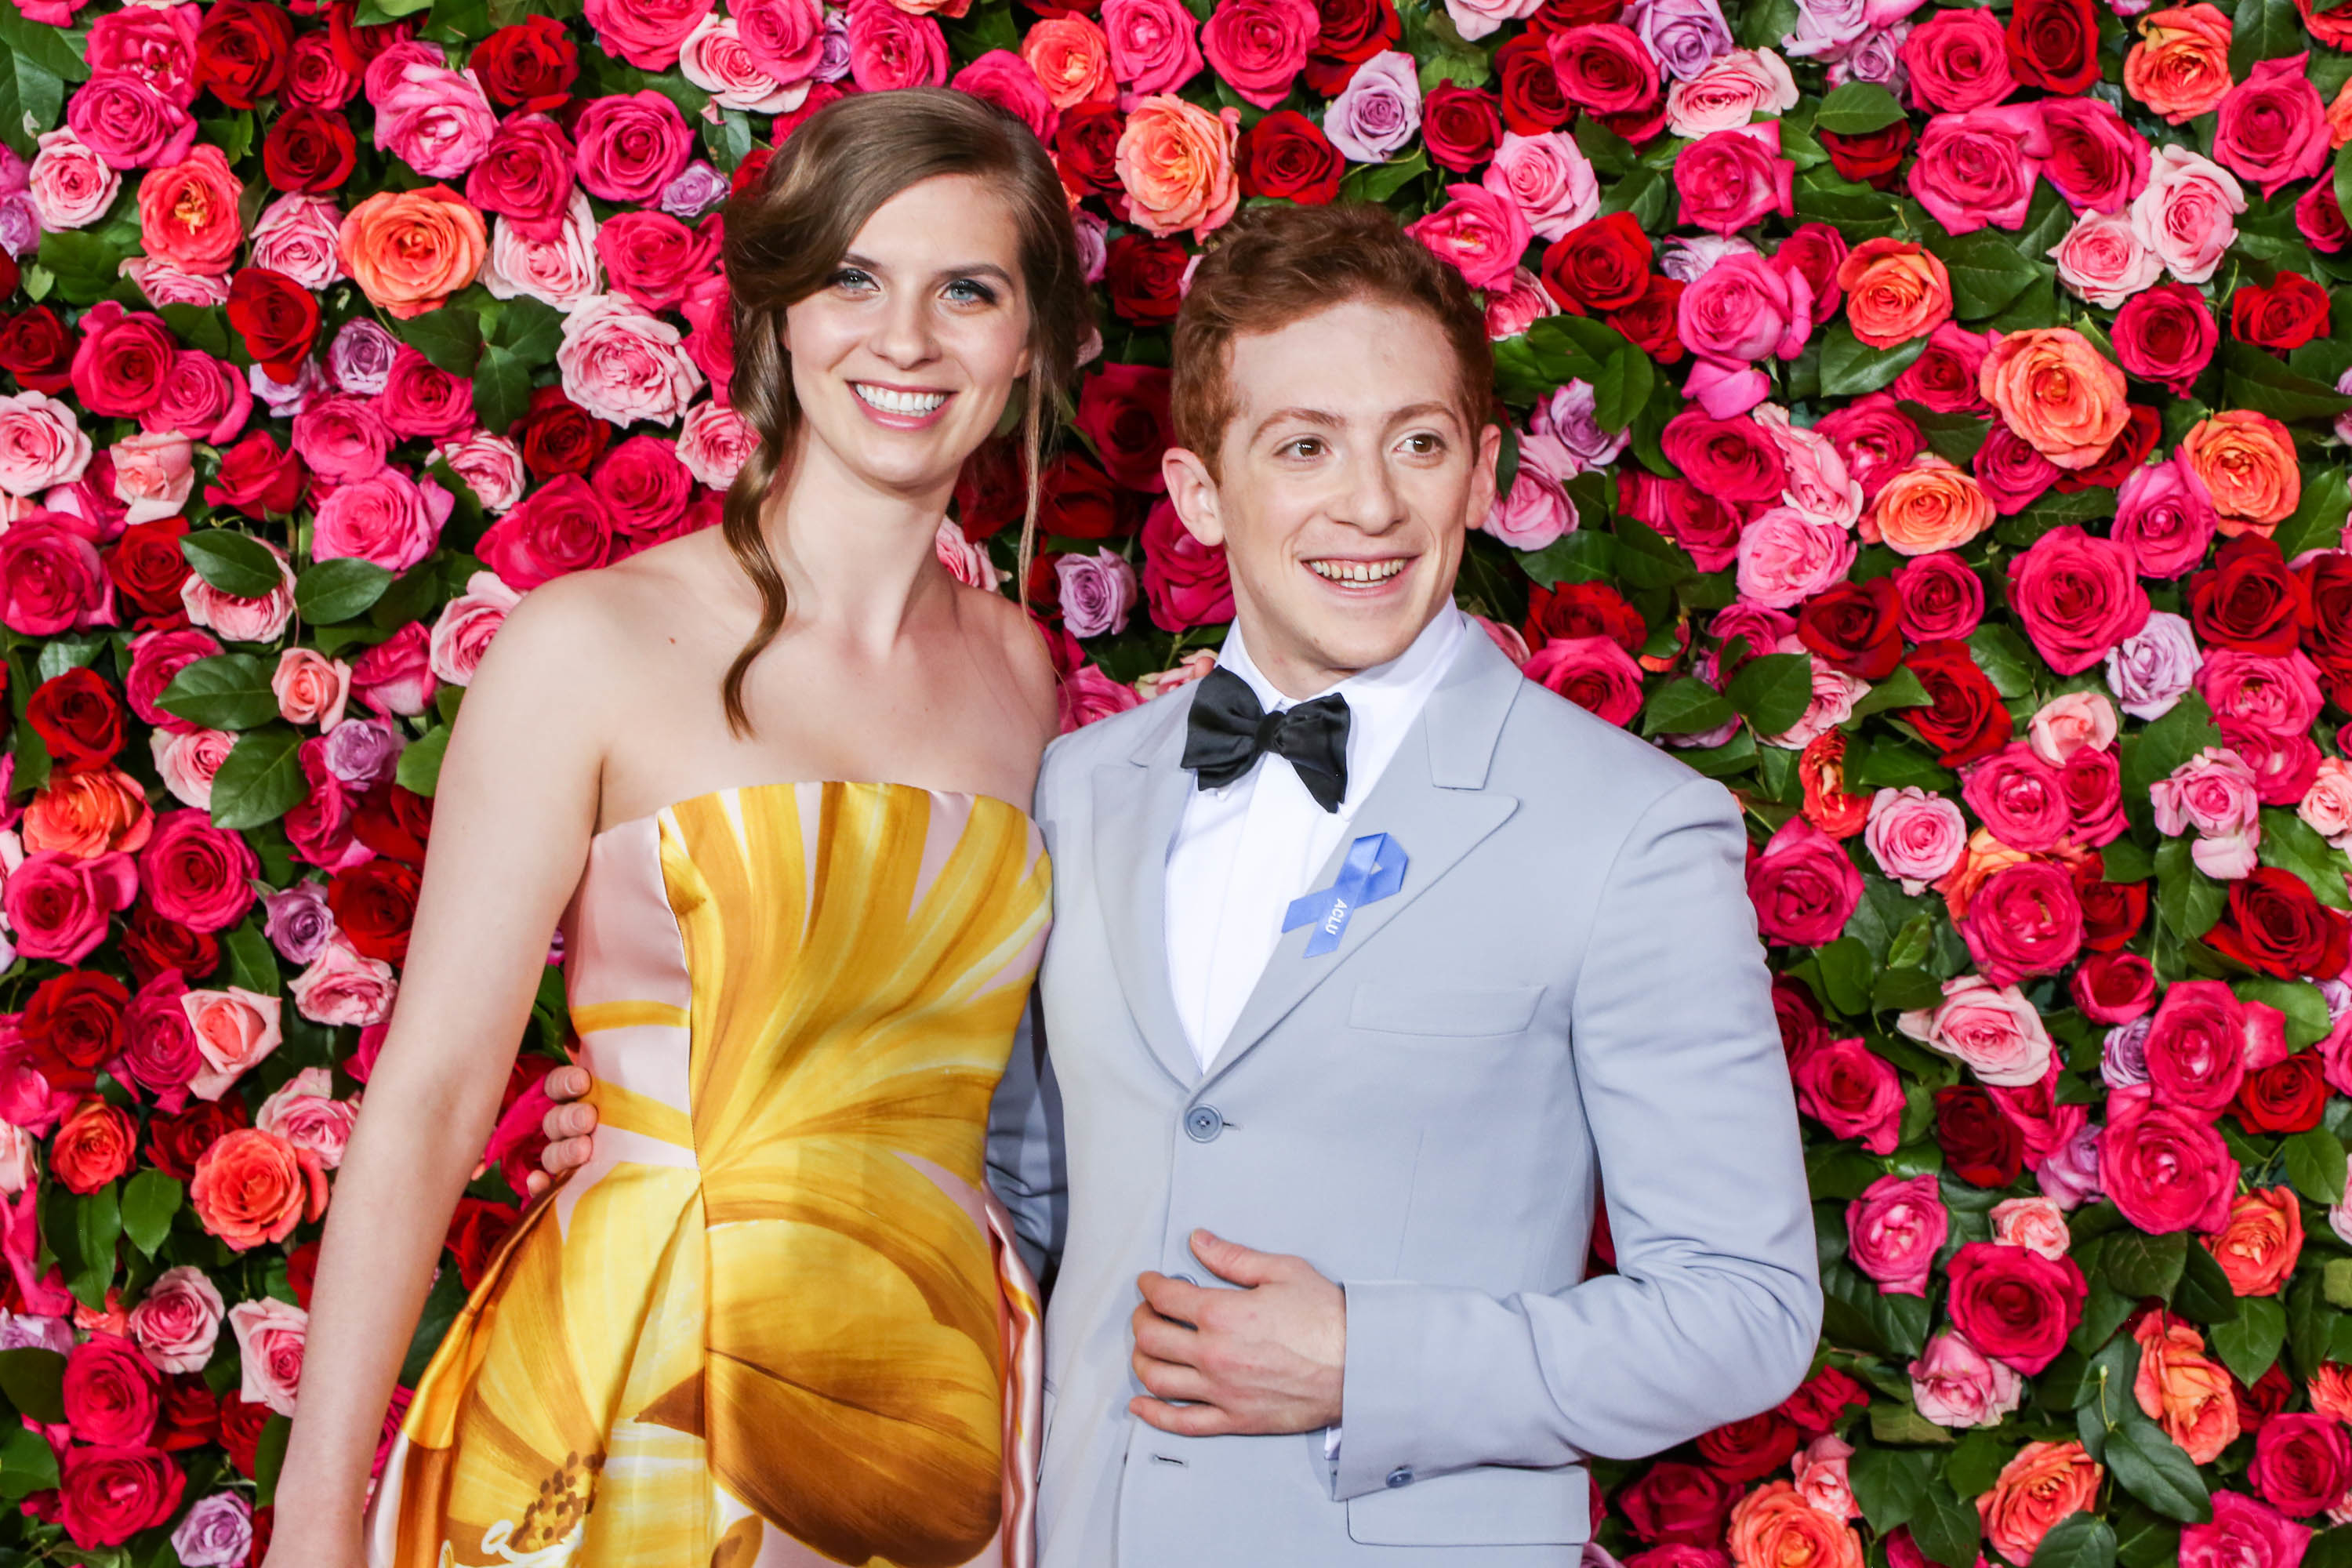 Ethan and Lilly at a media event against a floral background